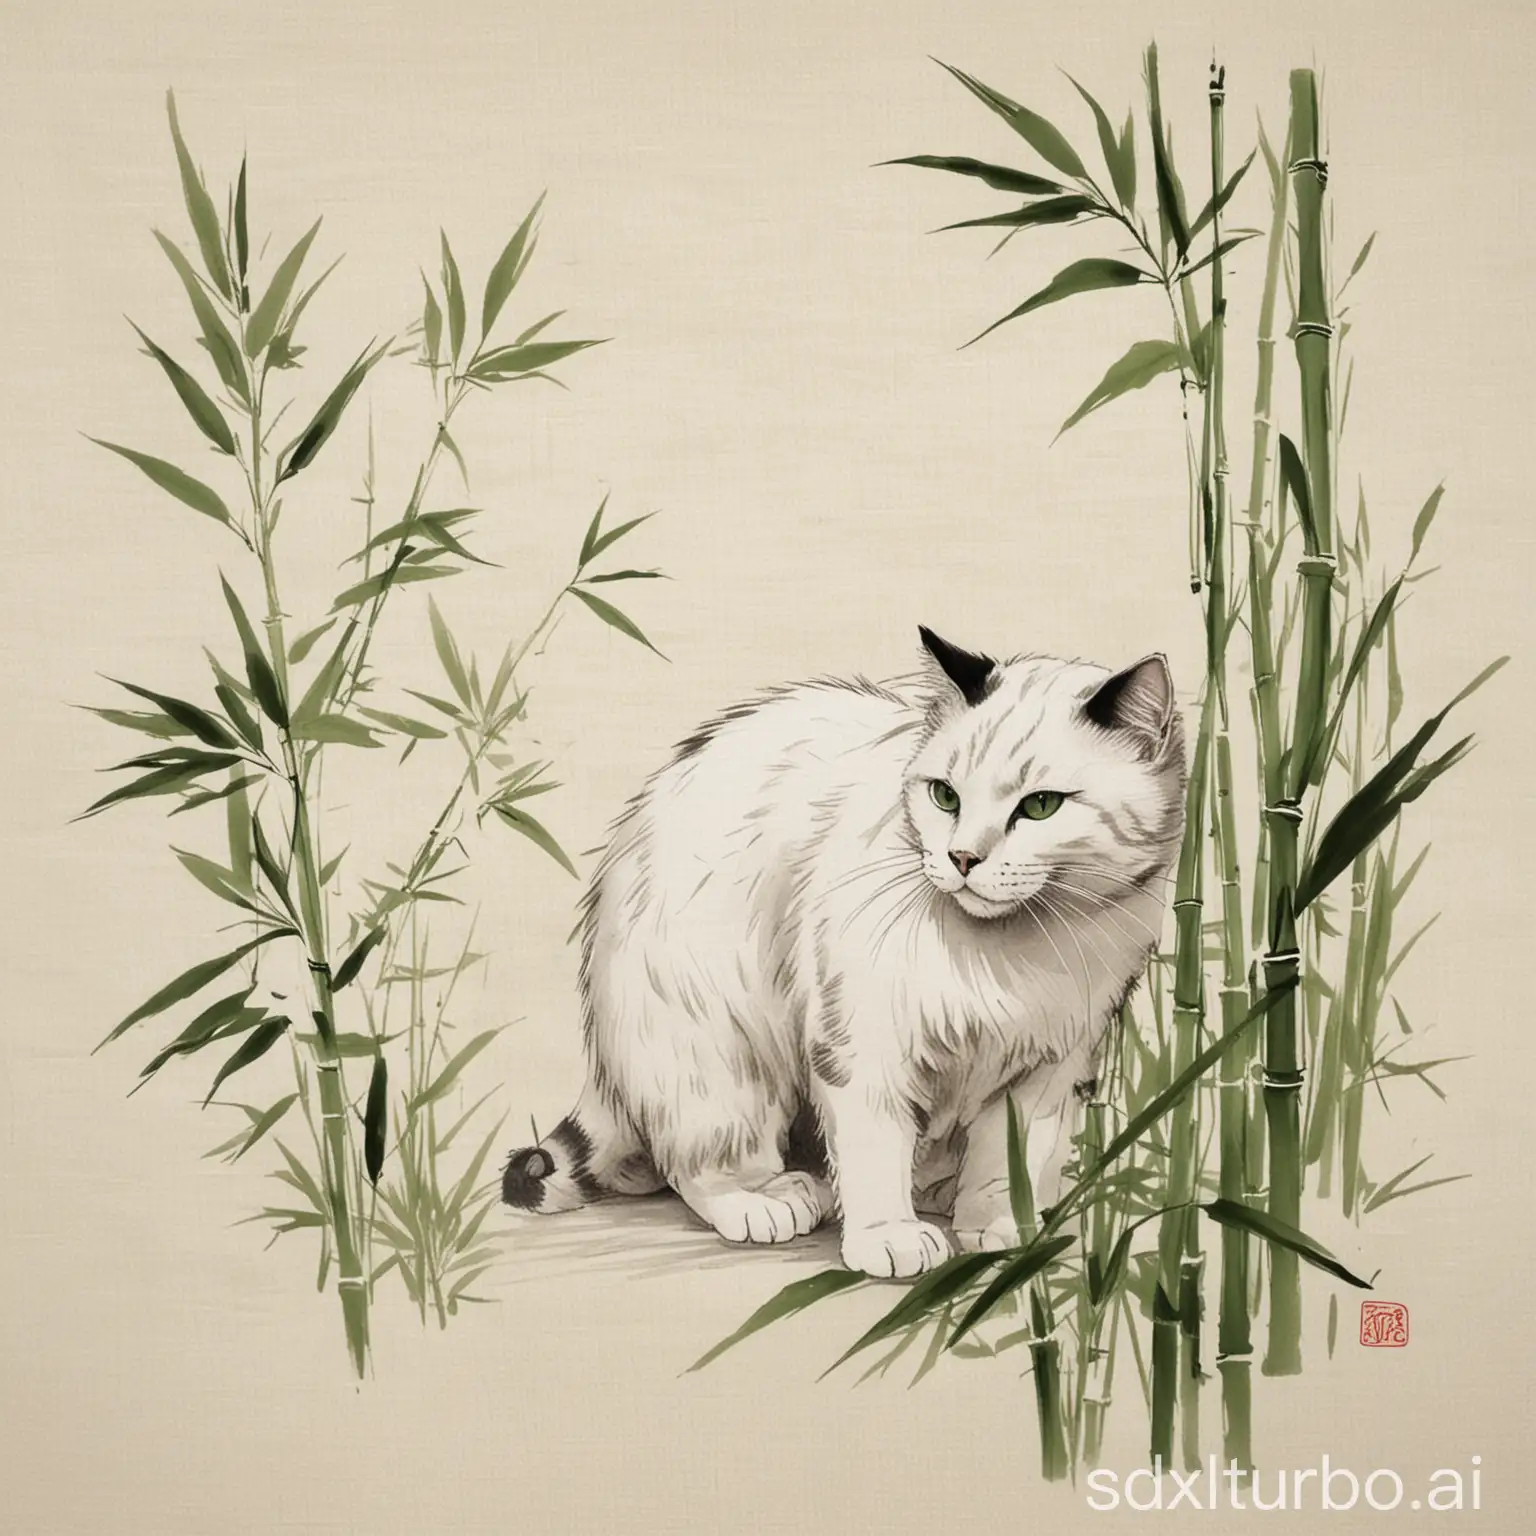 bamboo hand drawing, made on white cloth, sumie style, green leafs and stalks, a cat in profile is drawn too